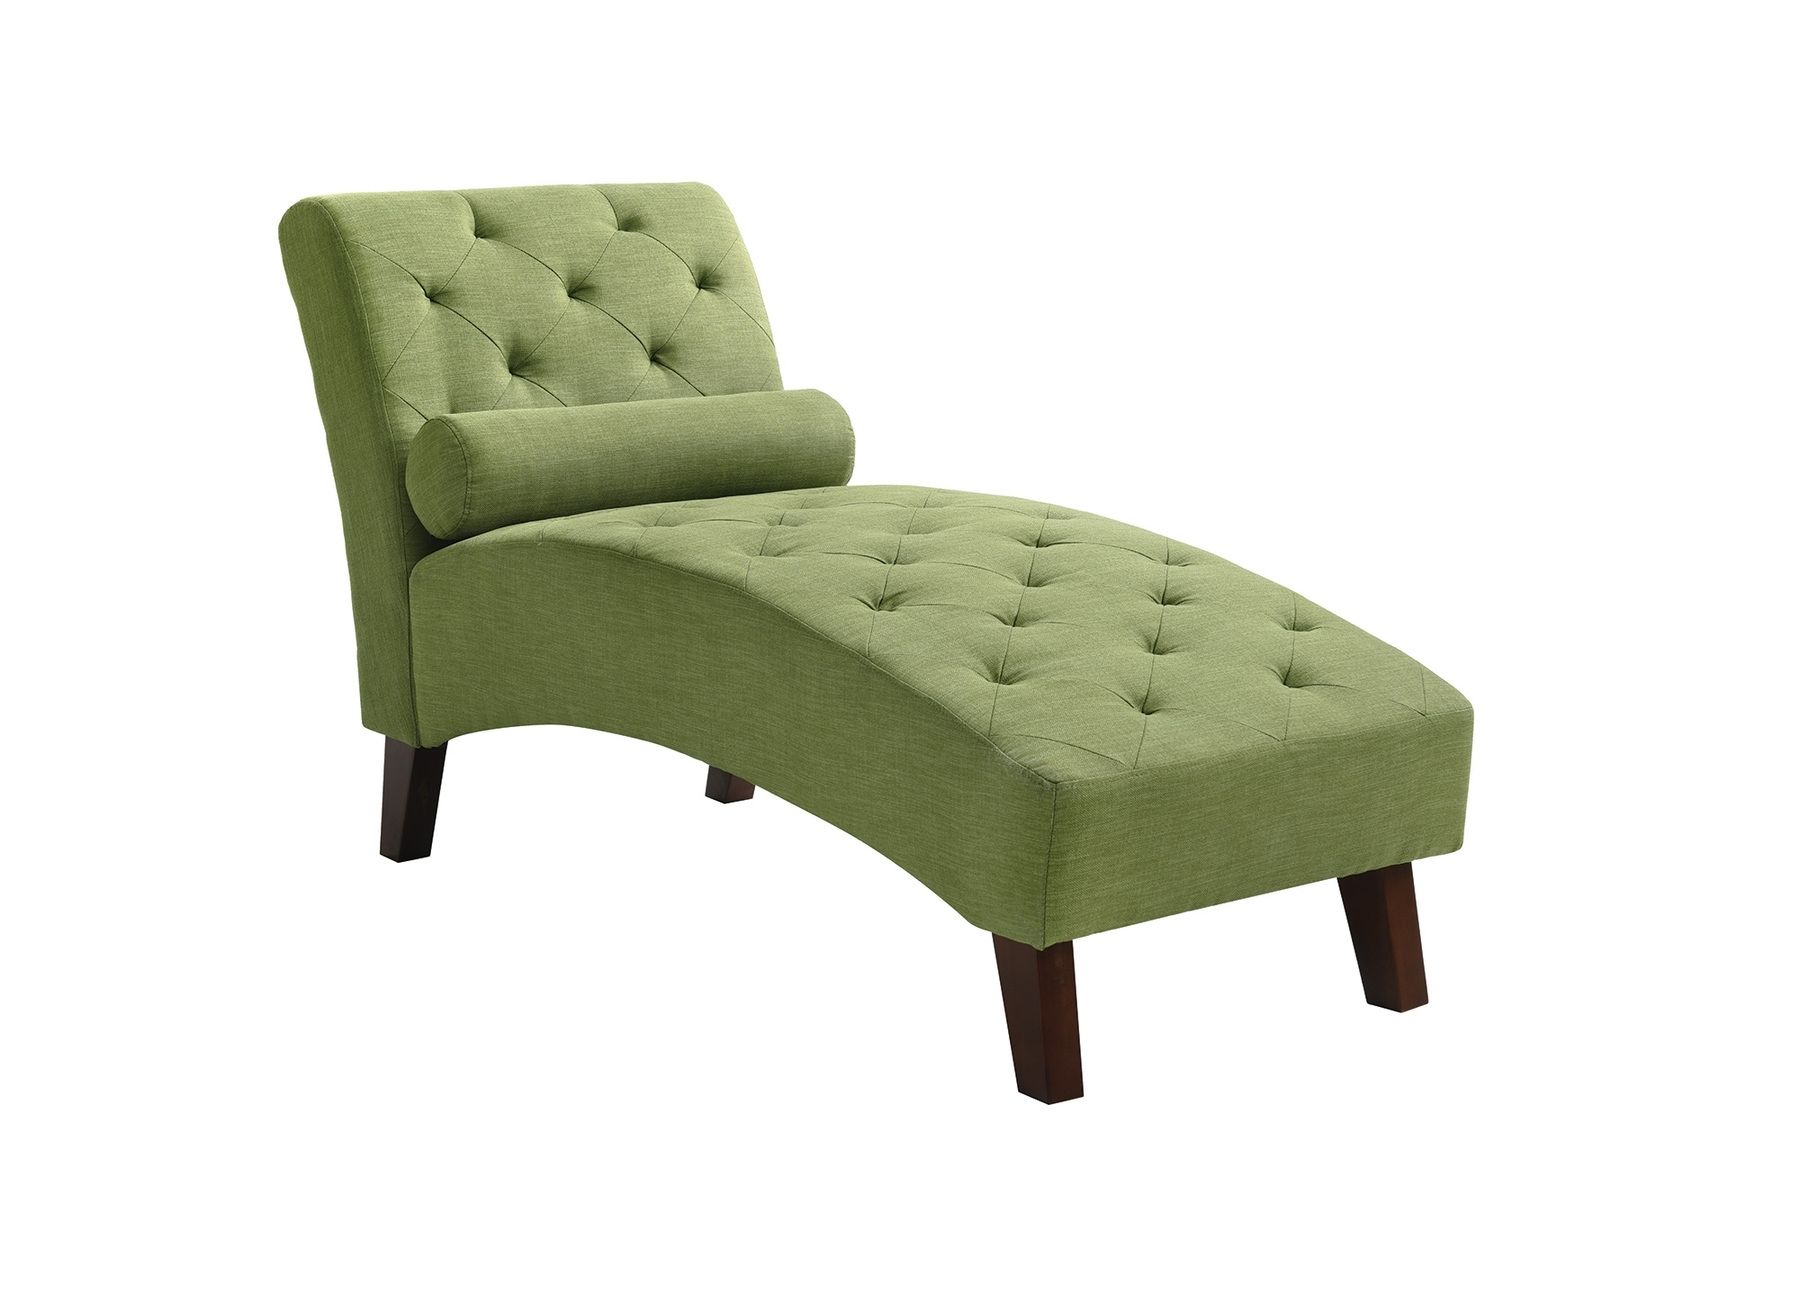 Newbury Green Chaise Lounge G251 Glory Furniture Chaises, Lounge With Regard To Popular Green Chaises (View 2 of 15)